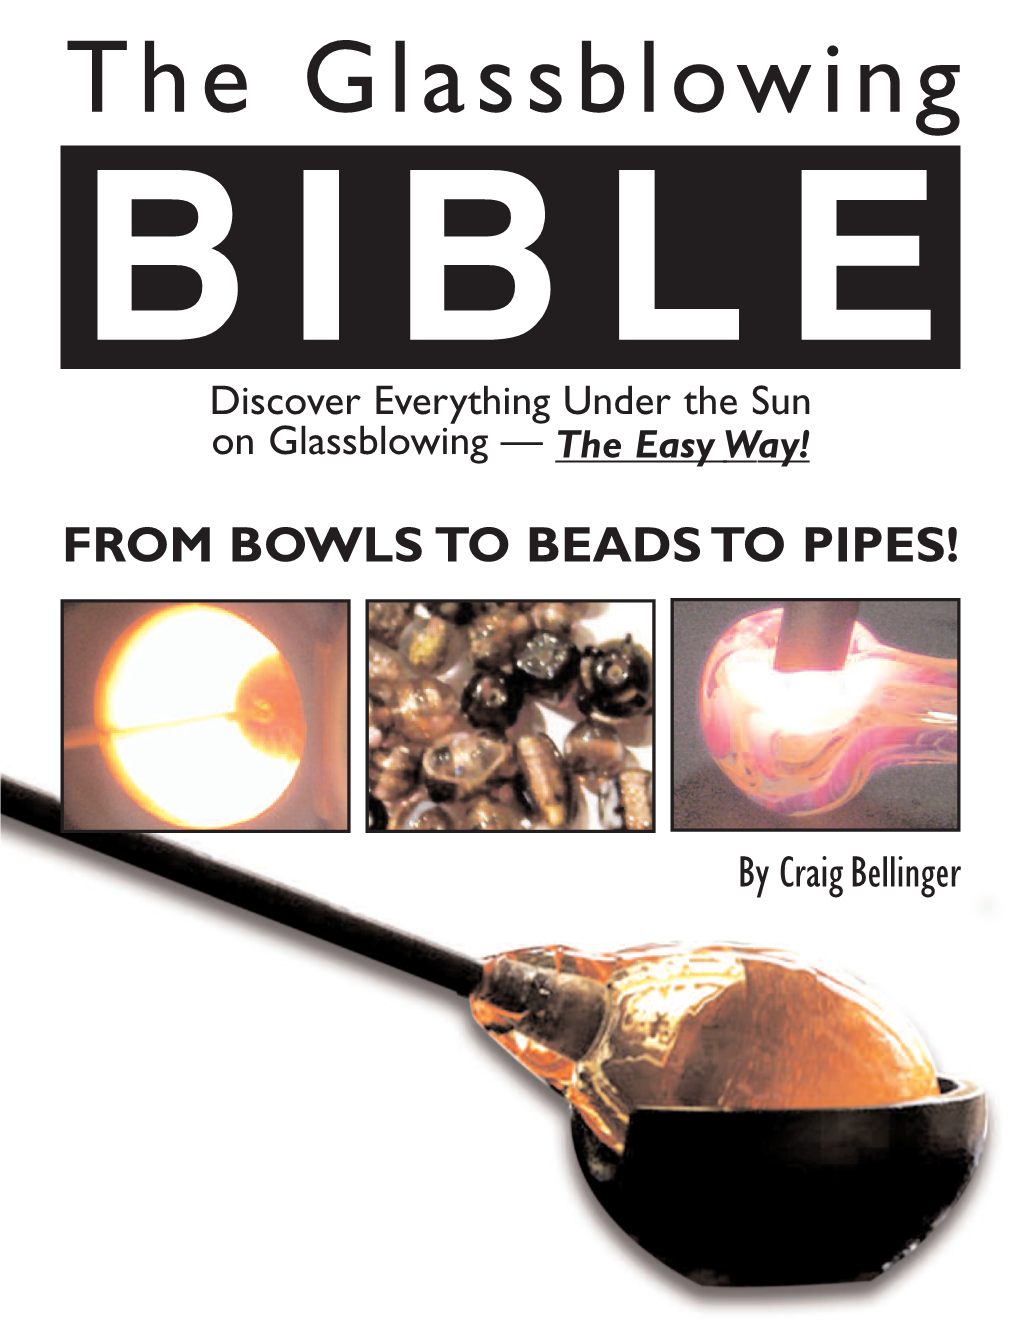 The Glassblowing BIBLE Discover Everything Under the Sun on Glassblowing — the Easy Way!